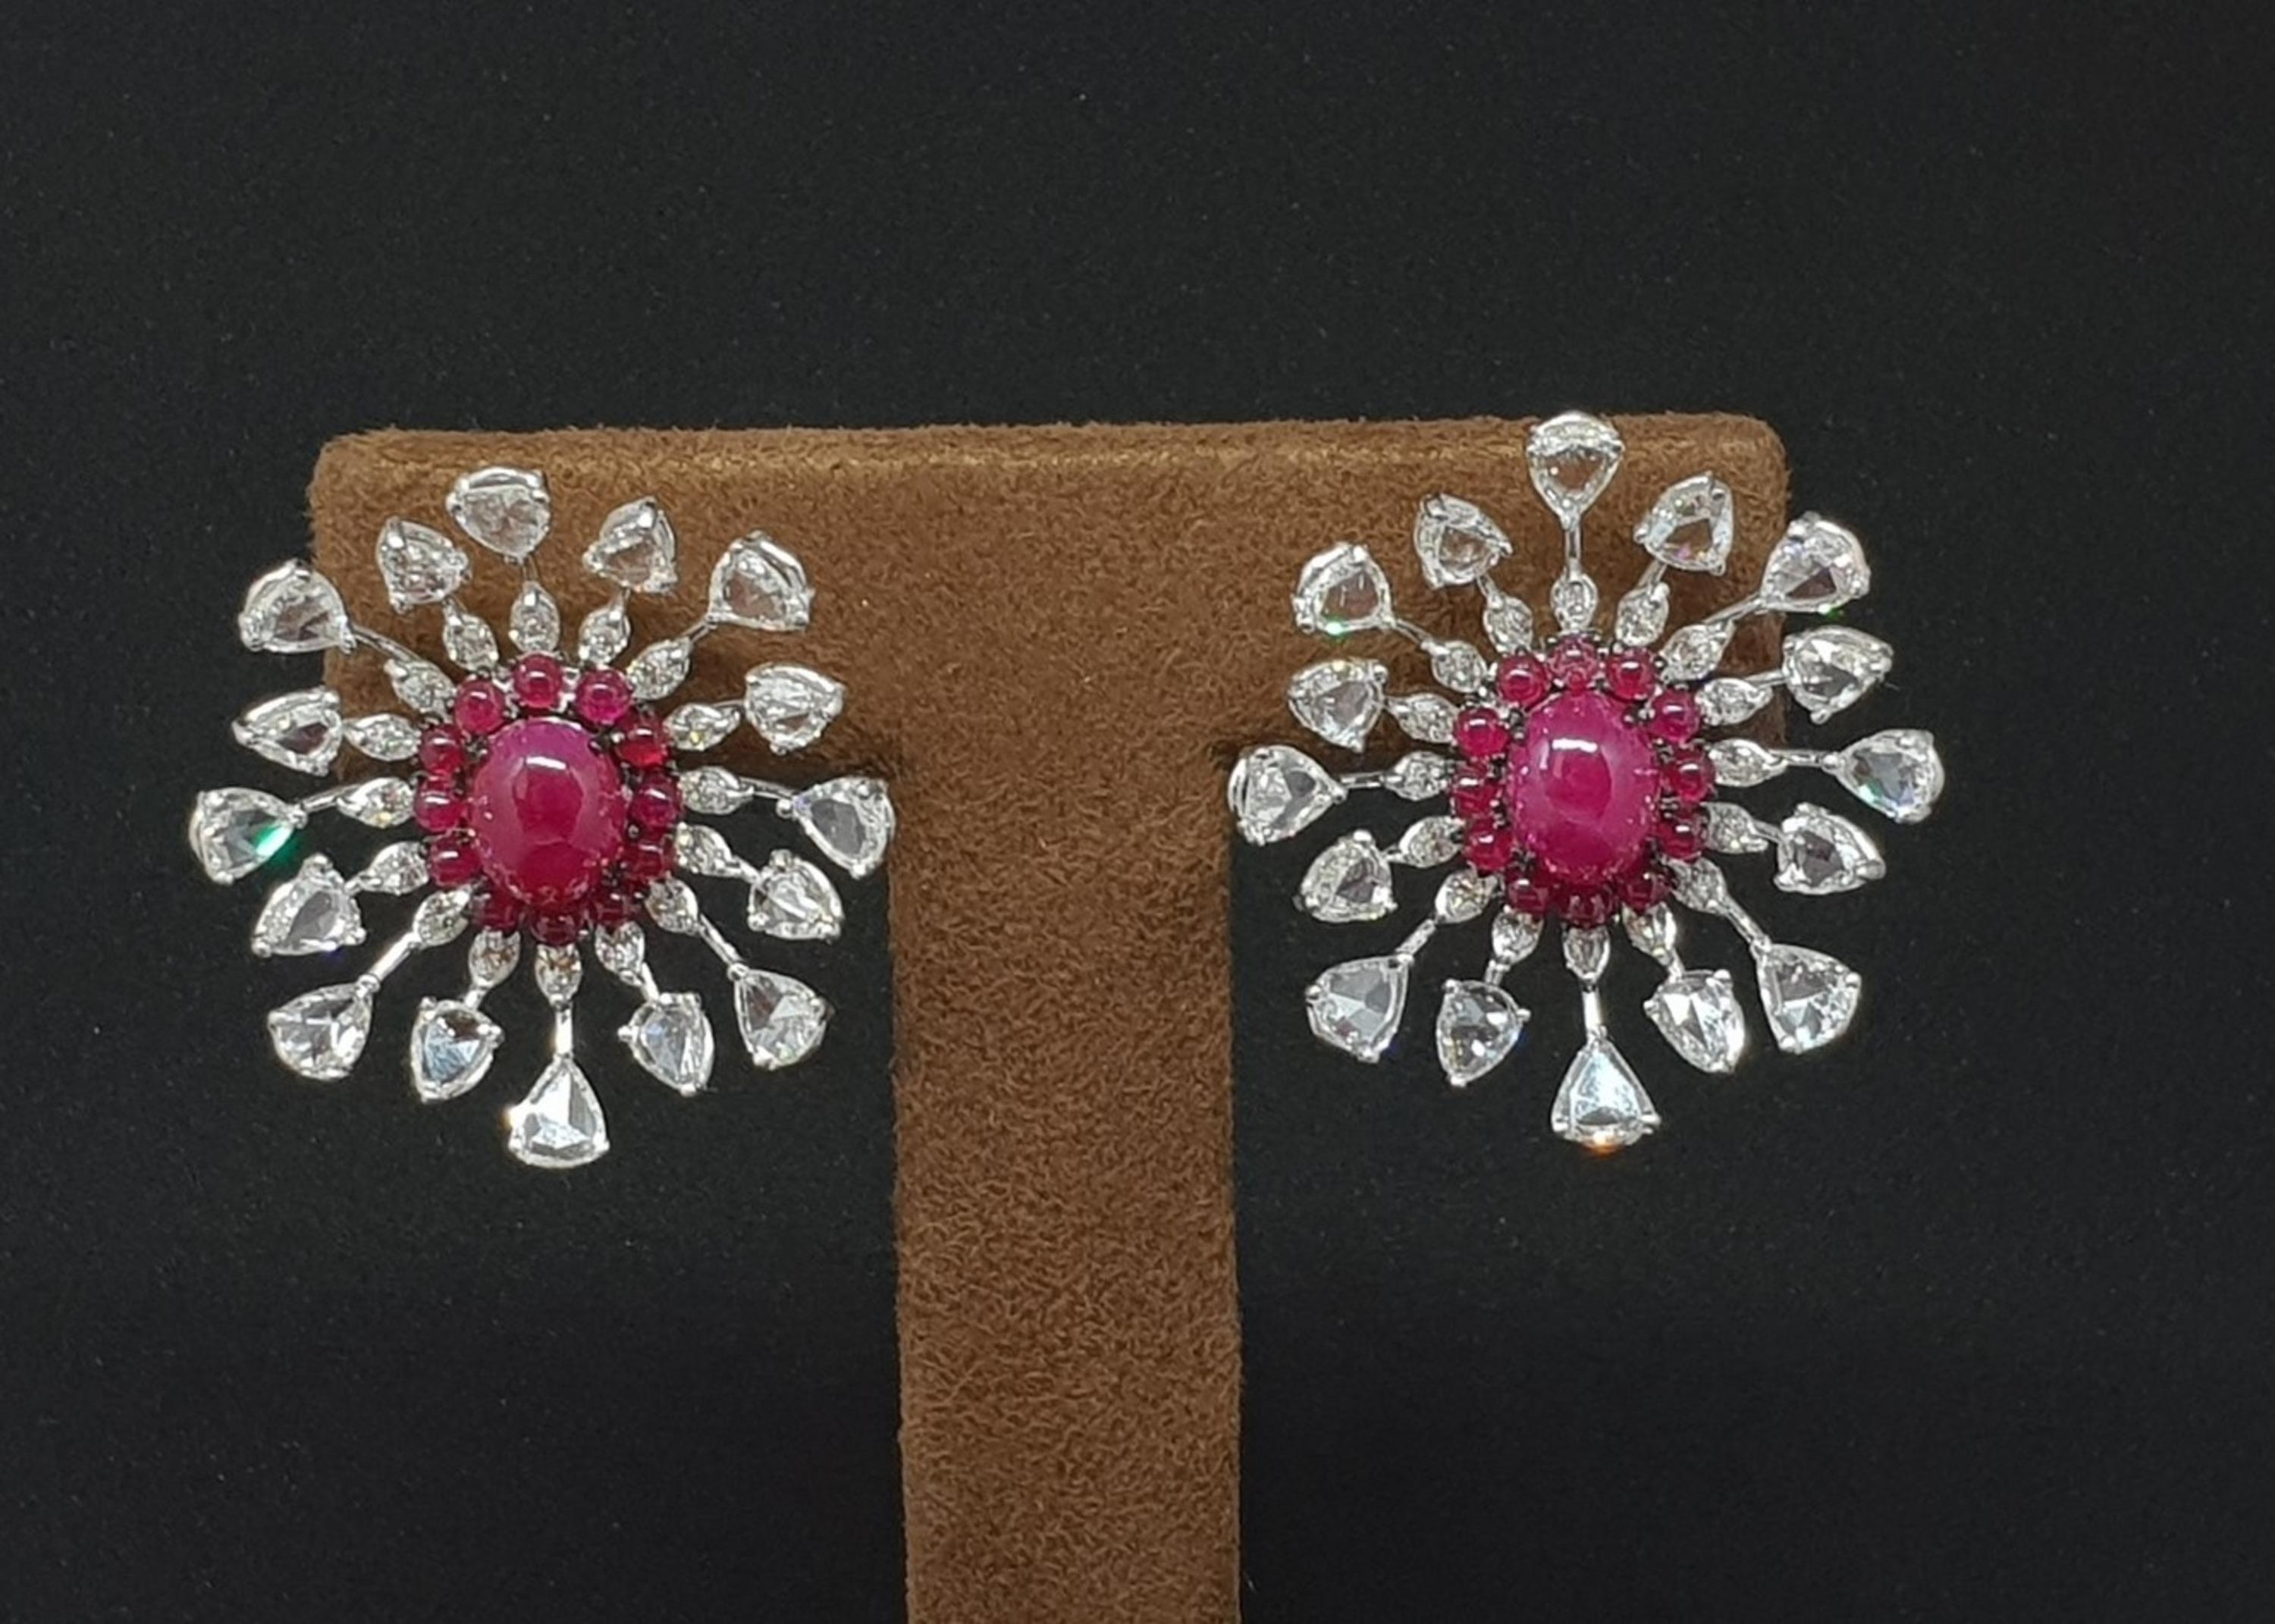 The rays of the sun always sends out a positive energy. Designed with the same spirit, the pear shape rose cut diamonds & brilliant cut marquise shape diamonds emit from the centre stone which is a ruby cabochon in these earrings.The placement of